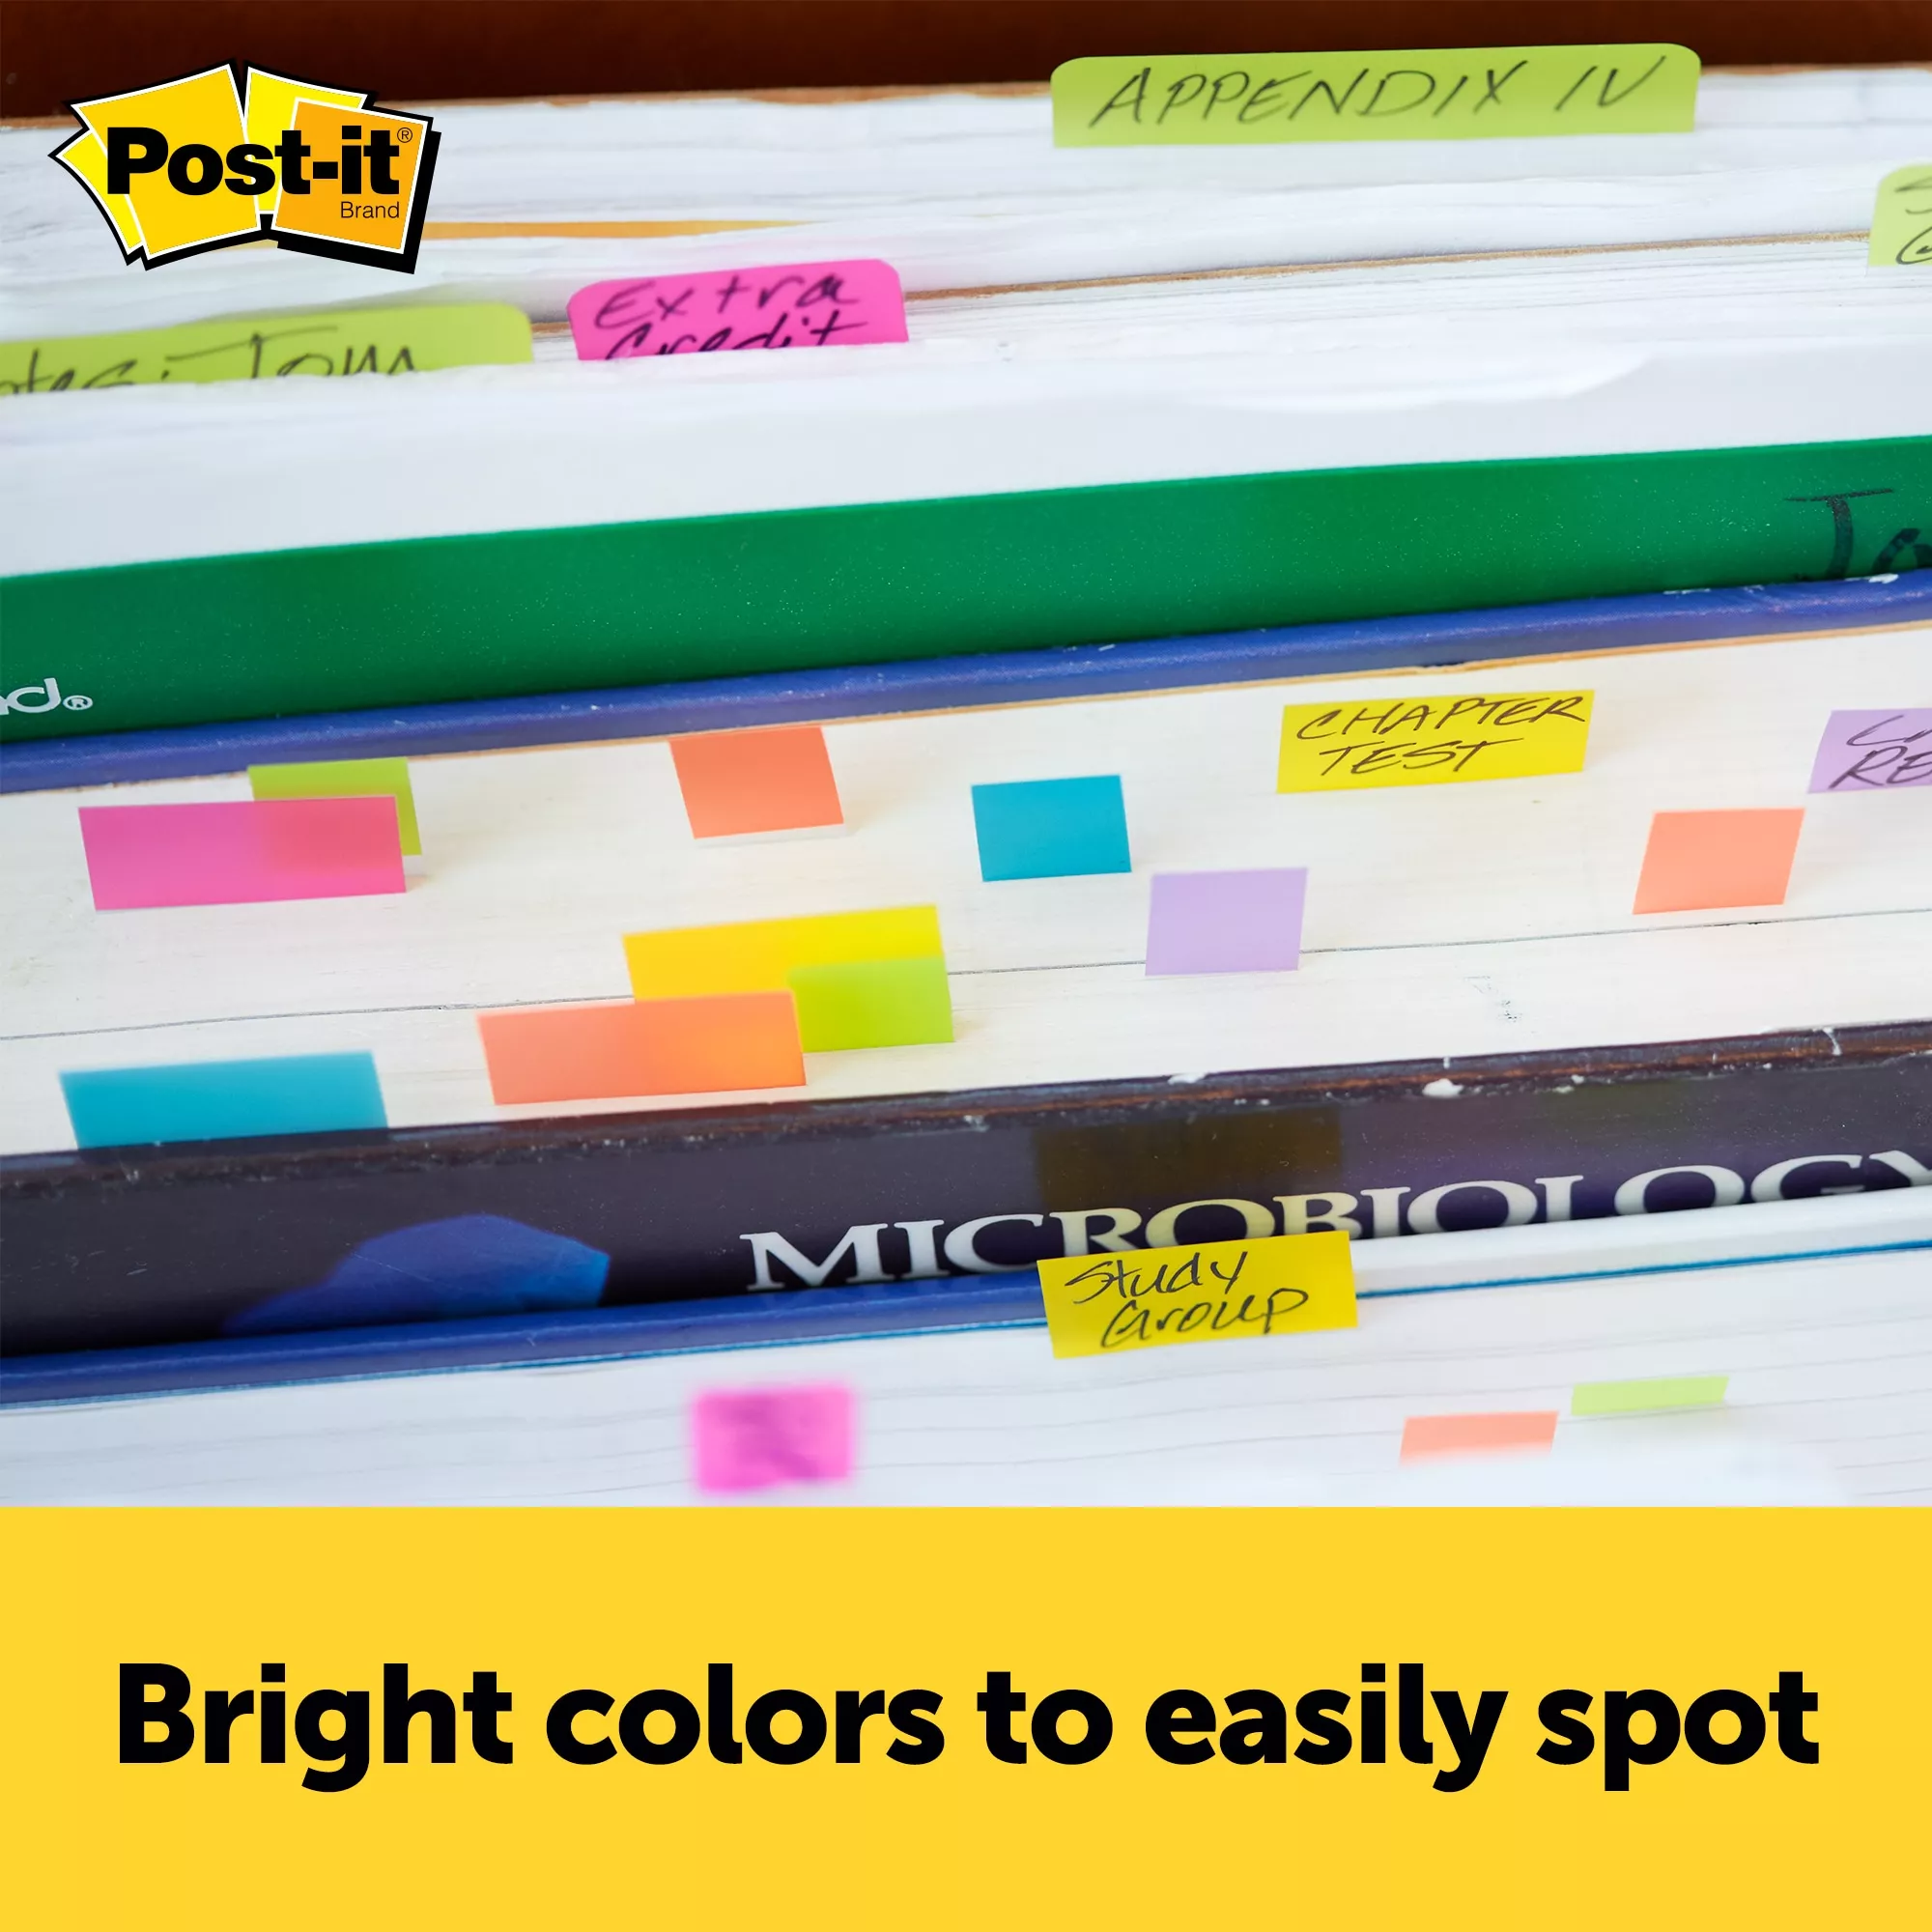 SKU 7100089793 | Post-it® Page Markers 5223